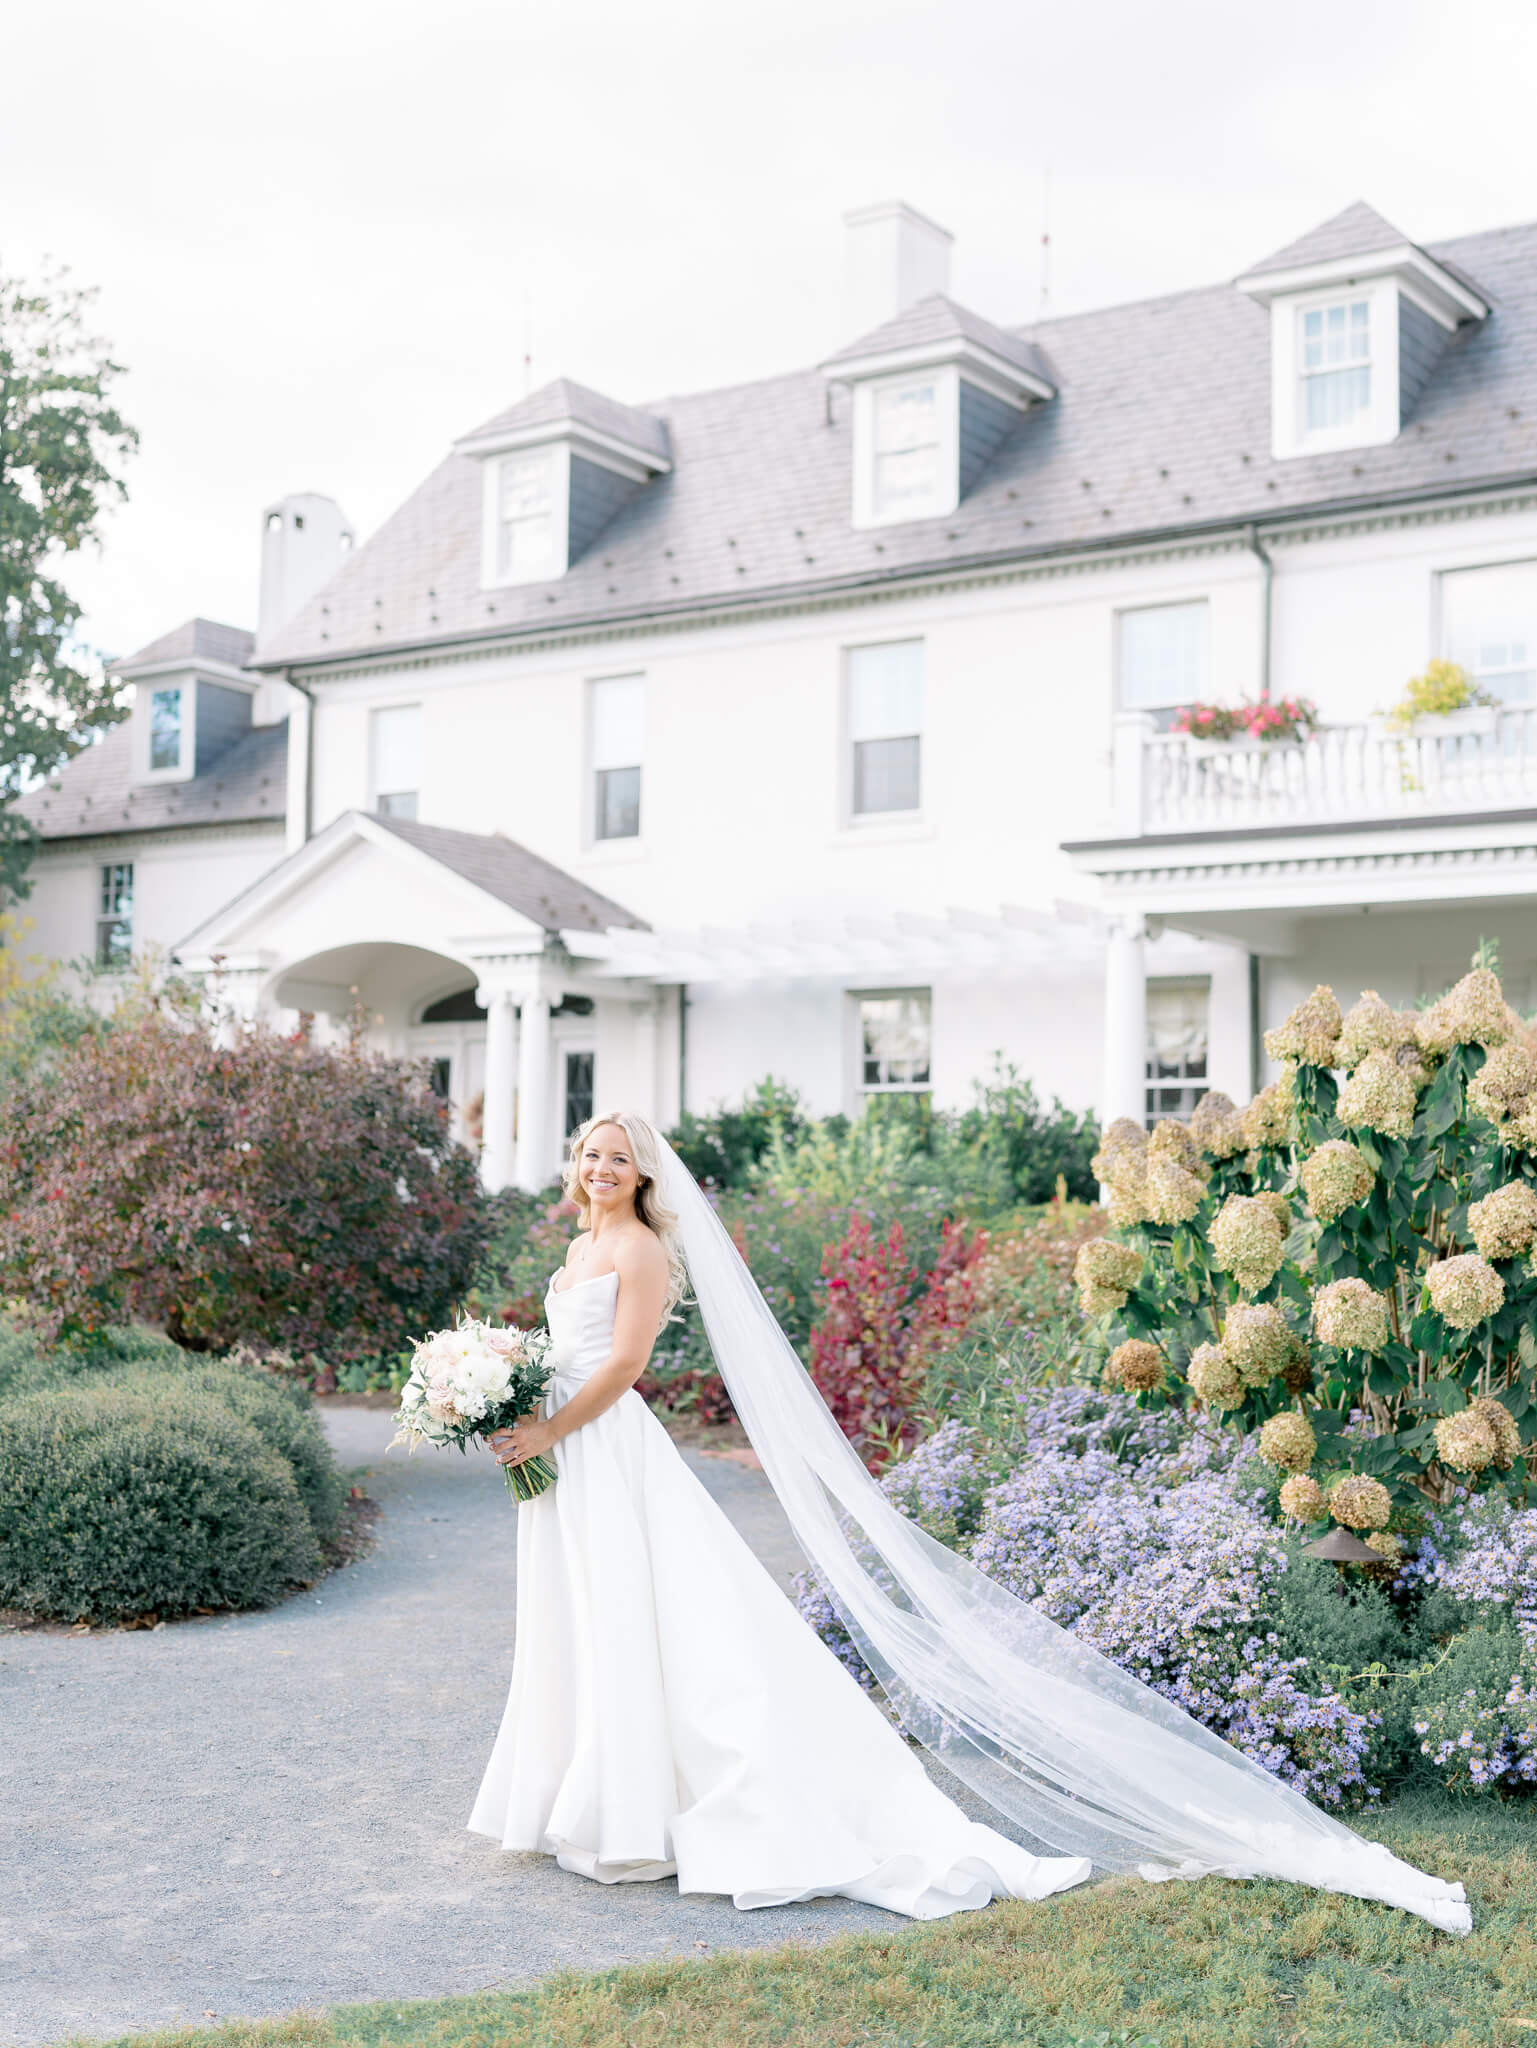 A bride in her wedding gown and cathedral length veil standing in front of River Farm Wedding venue holding her bouquet.